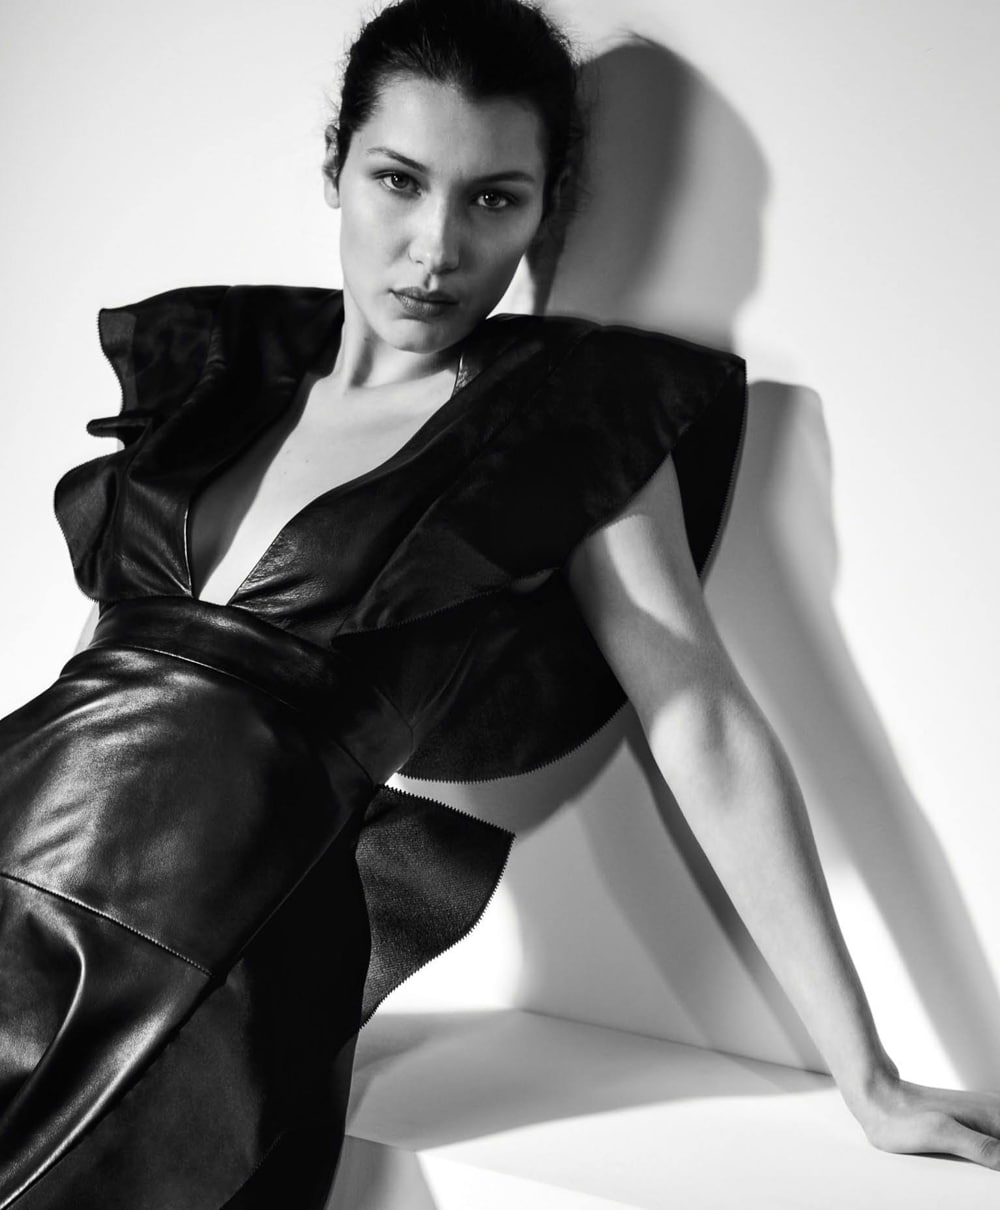 Vogue China April 2017 Bella Hadid by Collier Schorr